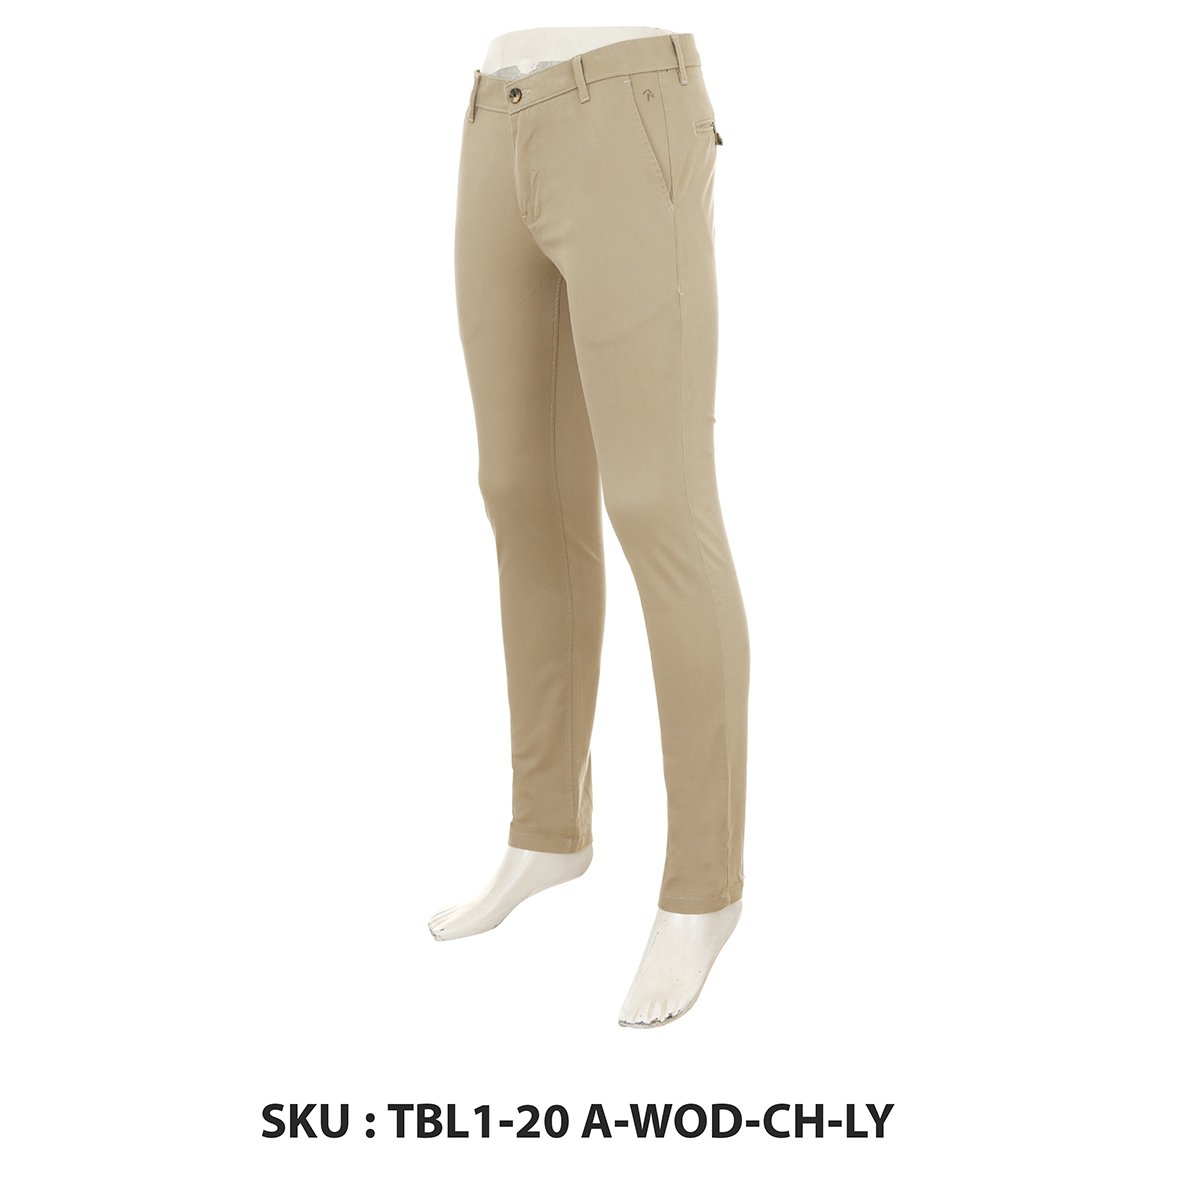 Classic Polo Mens Trousers Tbl1-20 A-Wod-Ch-Ly Wood 28